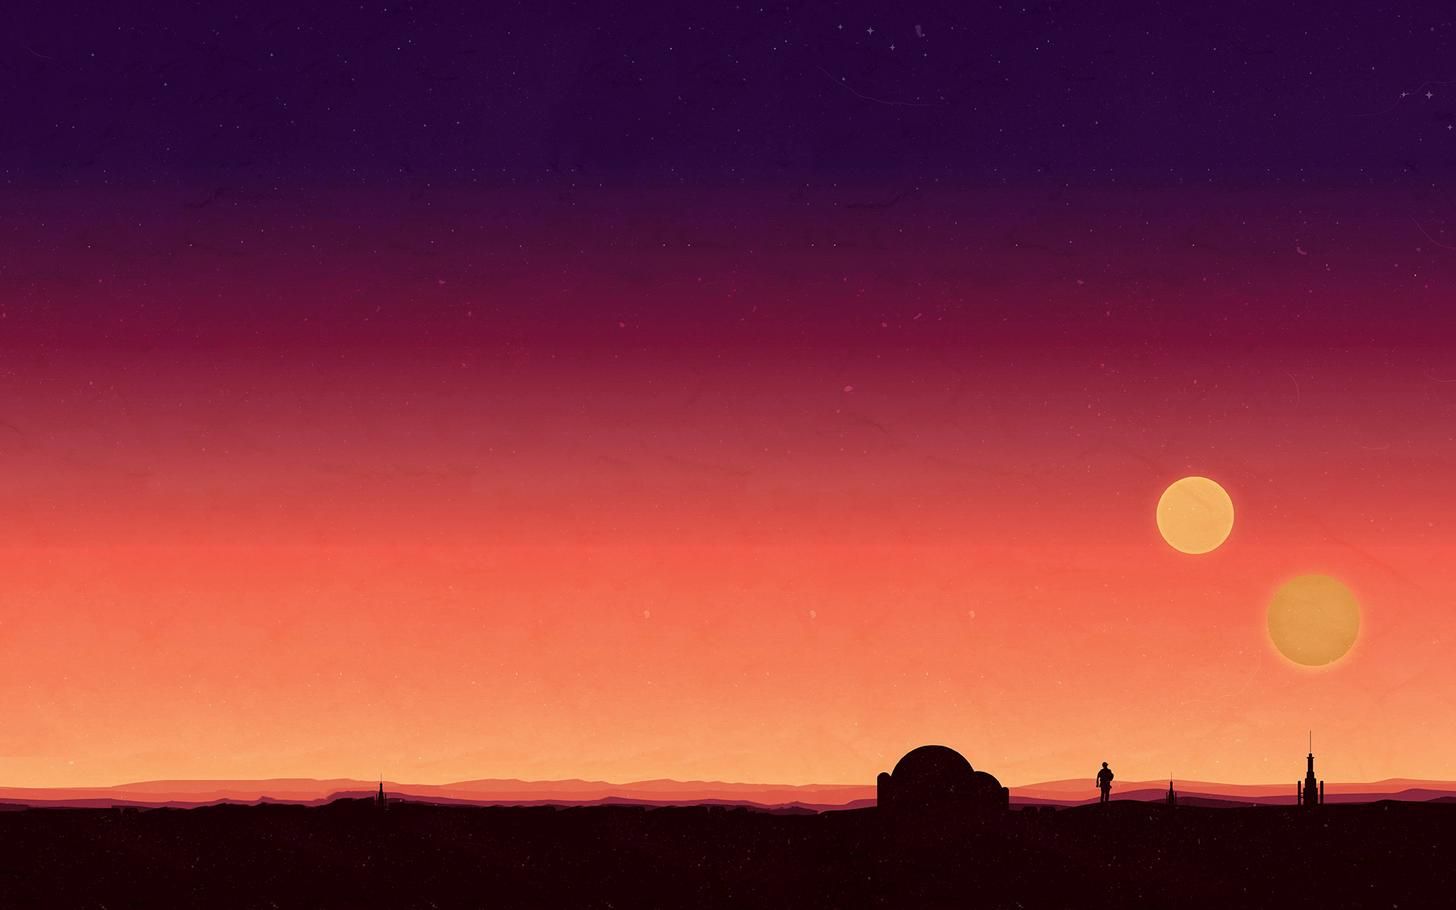 A sunset with two planets in the sky - Star Wars